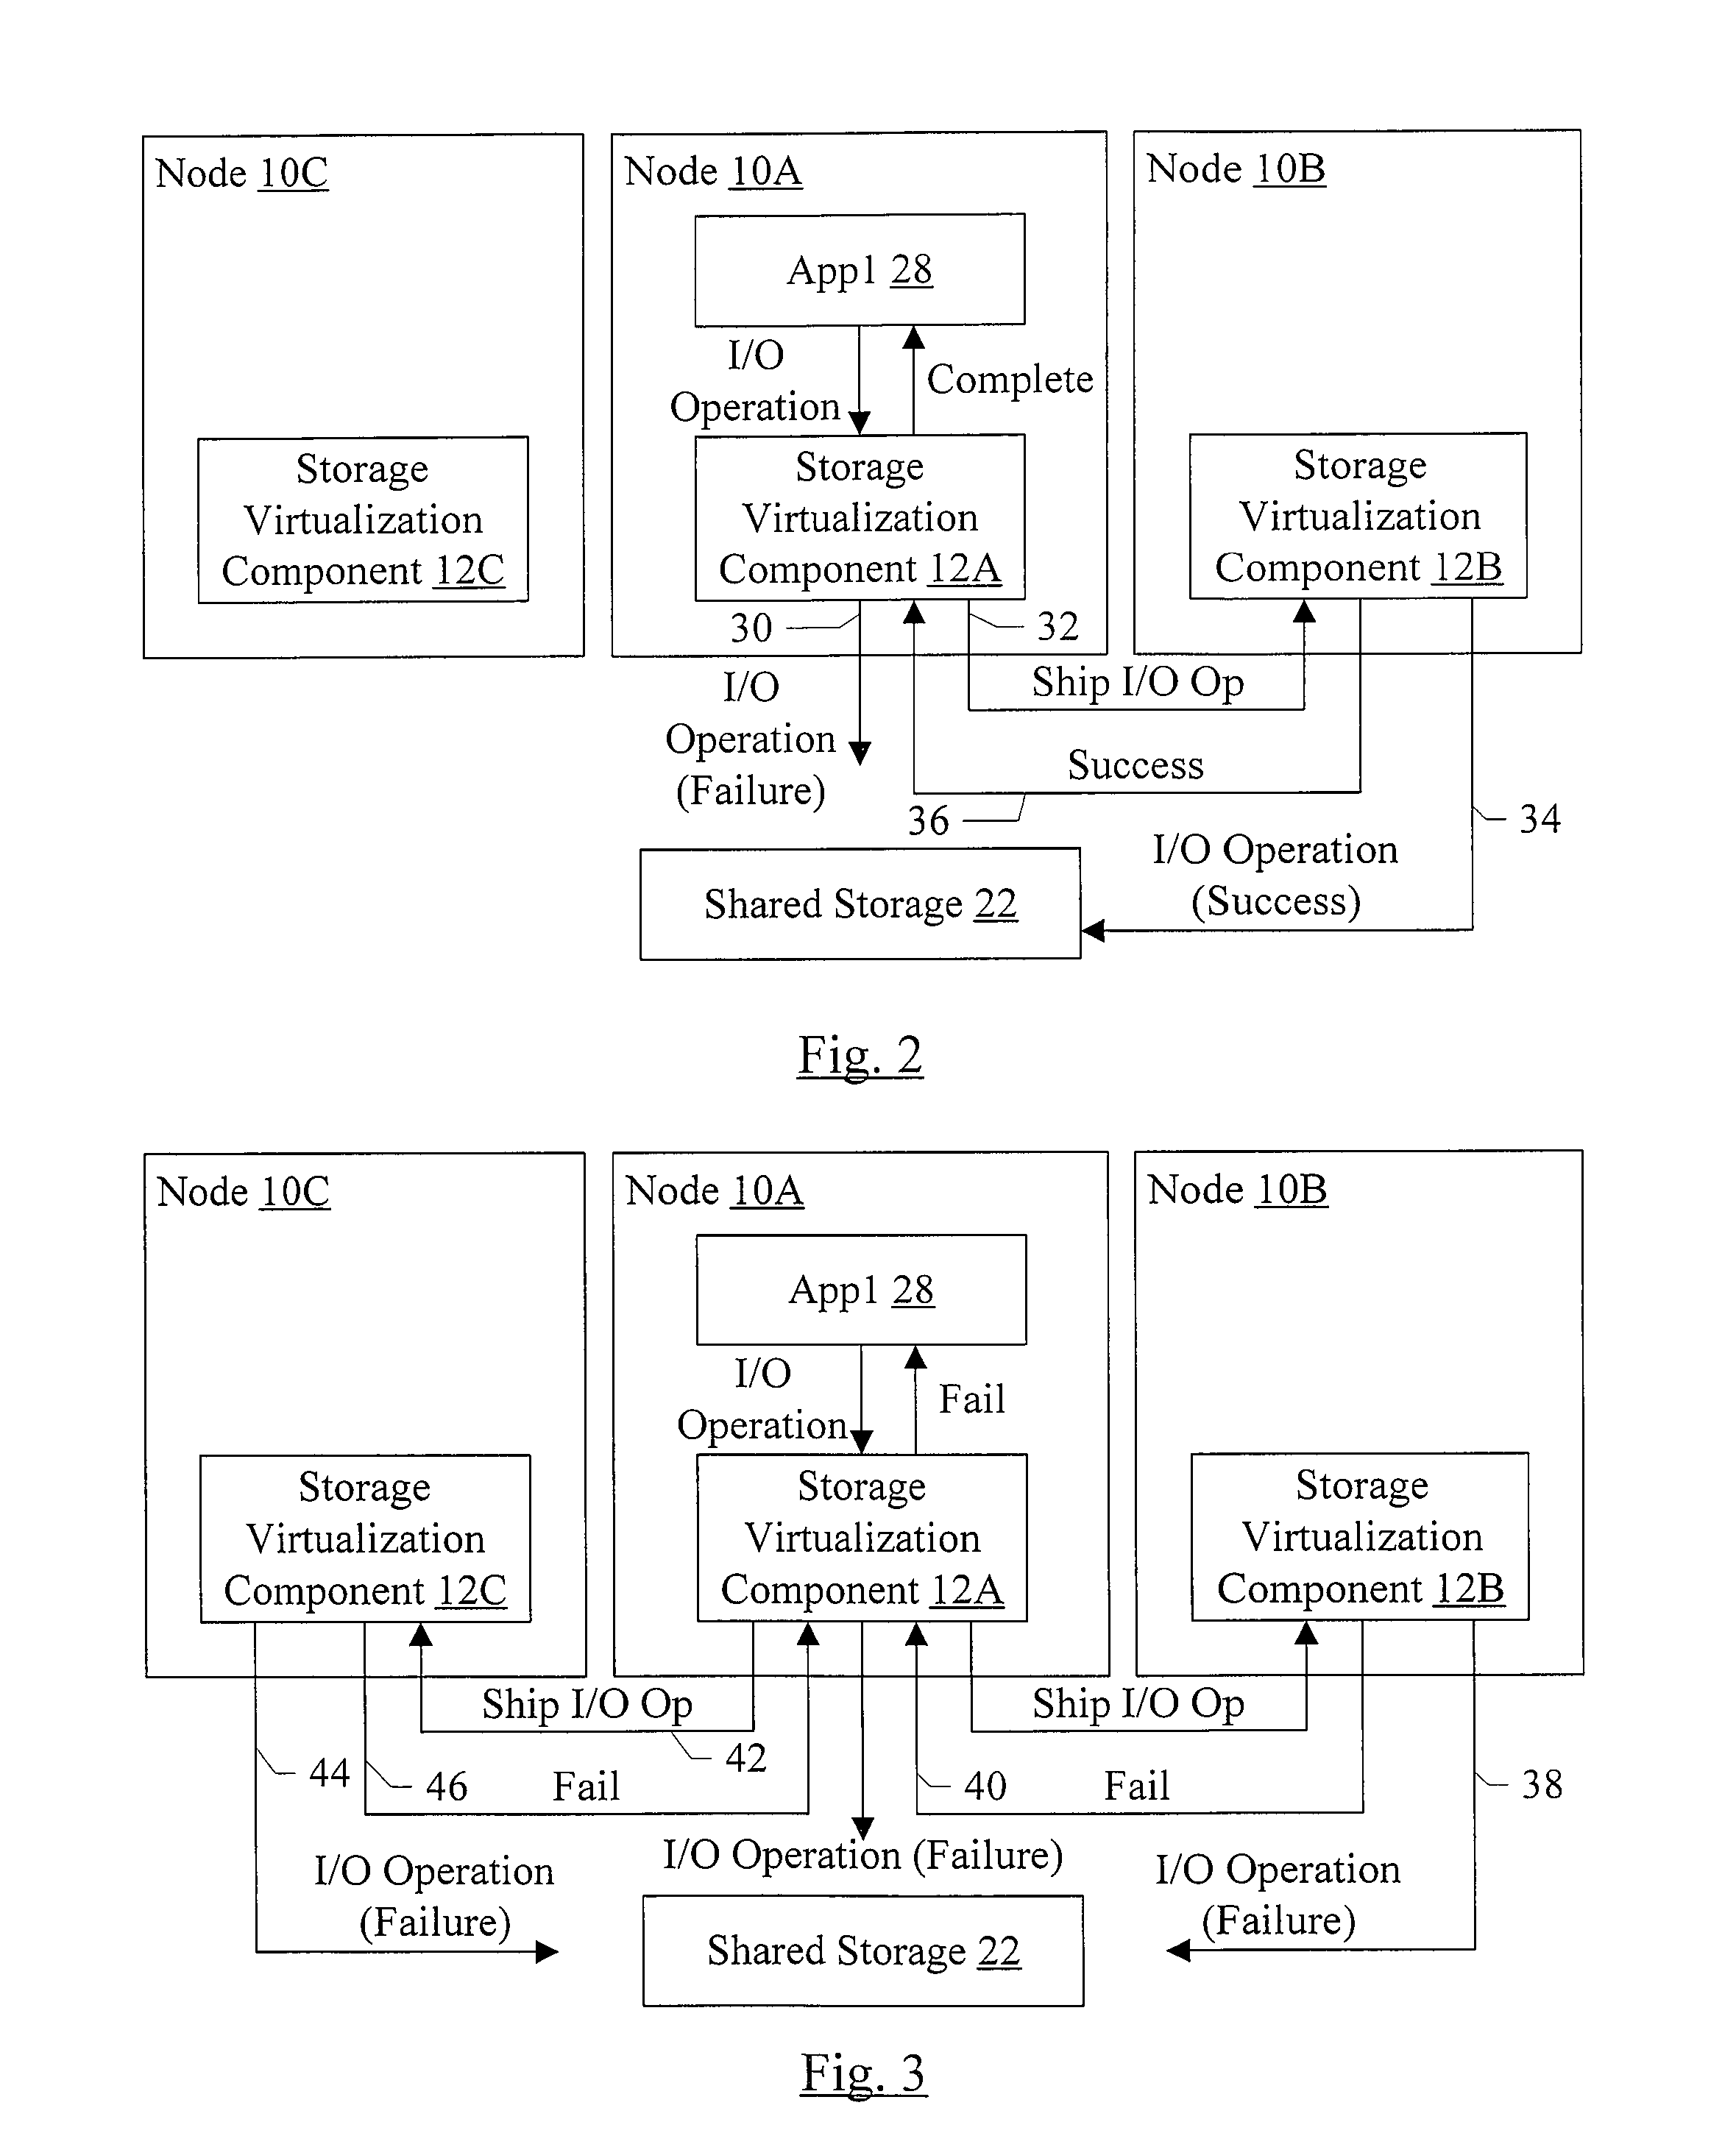 Providing fault tolerant storage system to a cluster